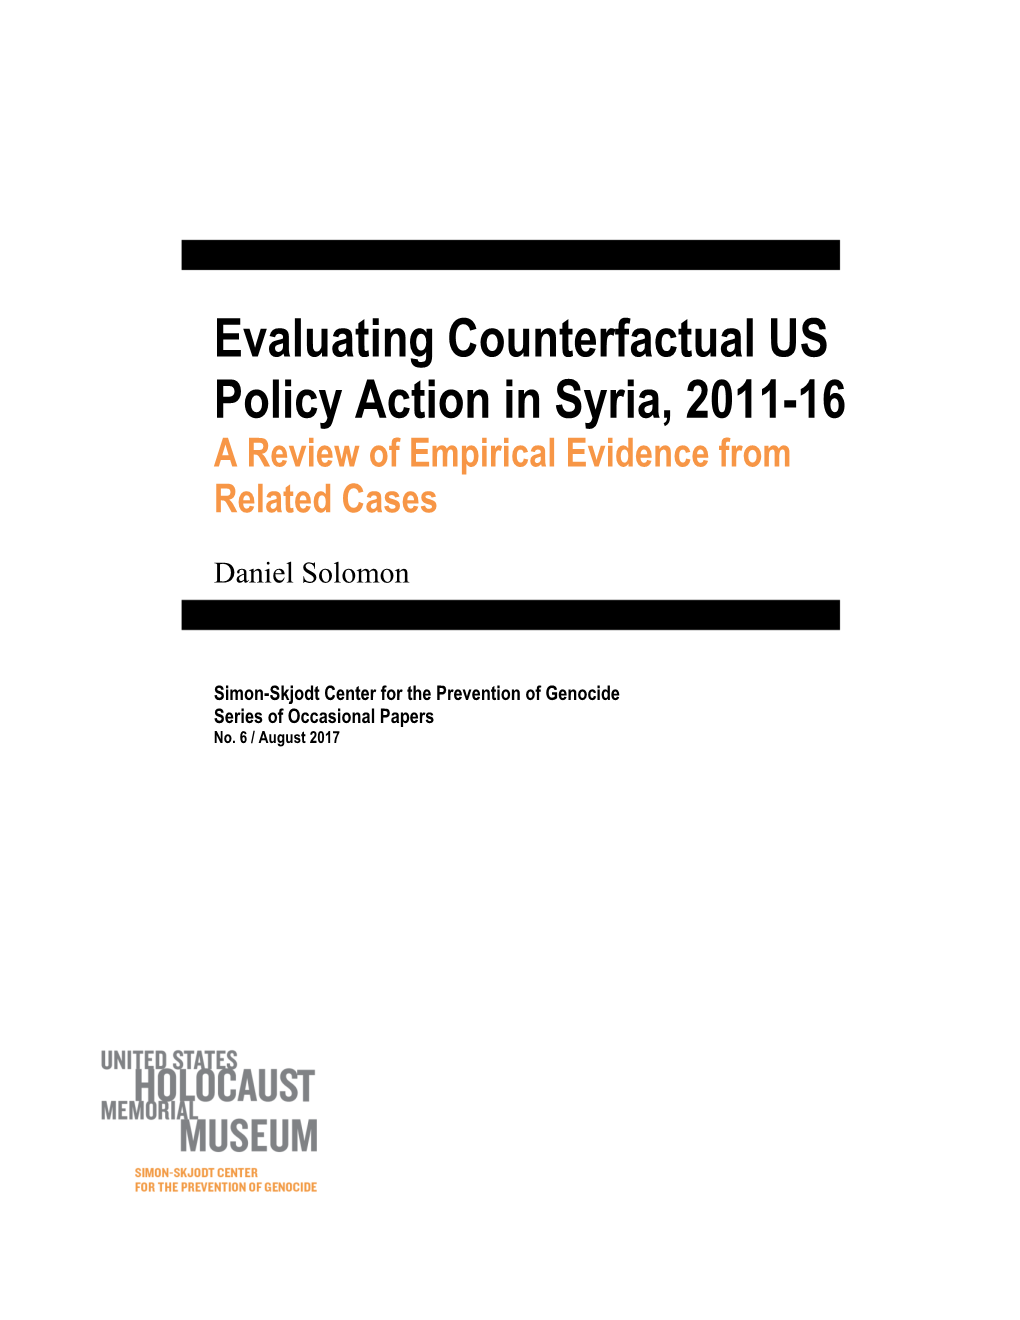 Evaluating Counterfactual US Policy Action in Syria, 2011-16 a Review of Empirical Evidence from Related Cases